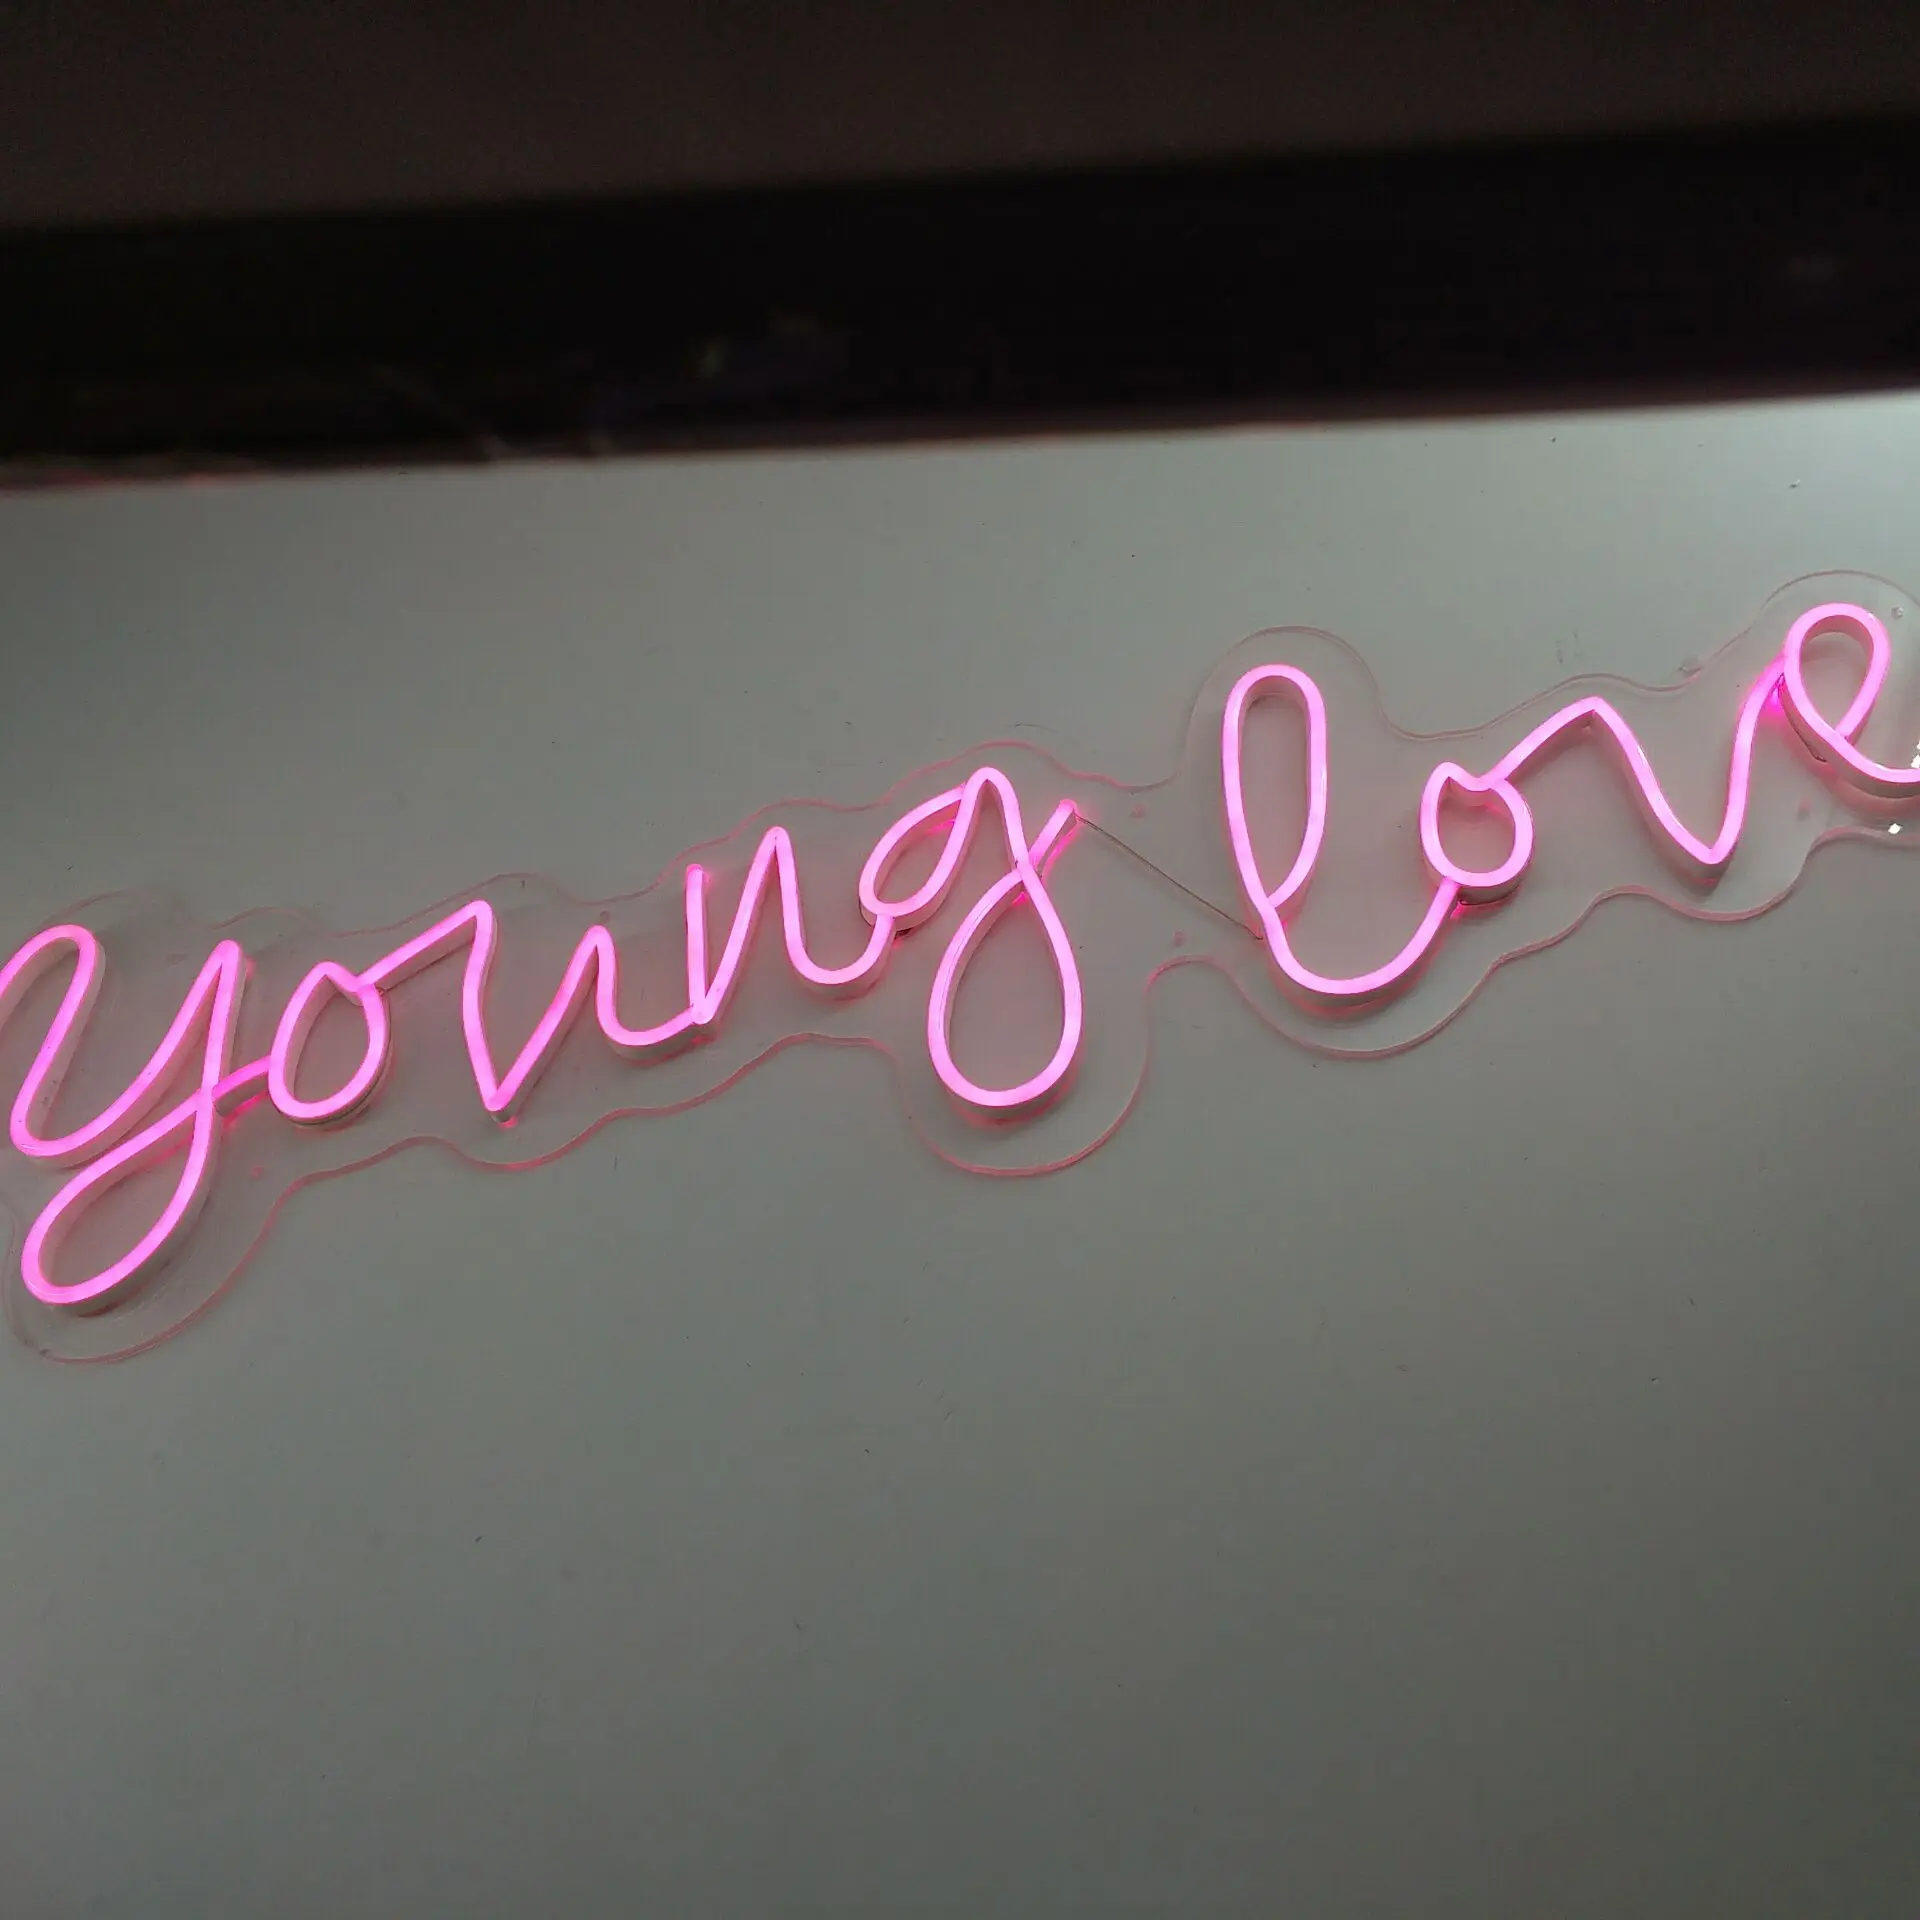 Outdoor decorate soft tube sign neon light letters for wall and shop name board designs